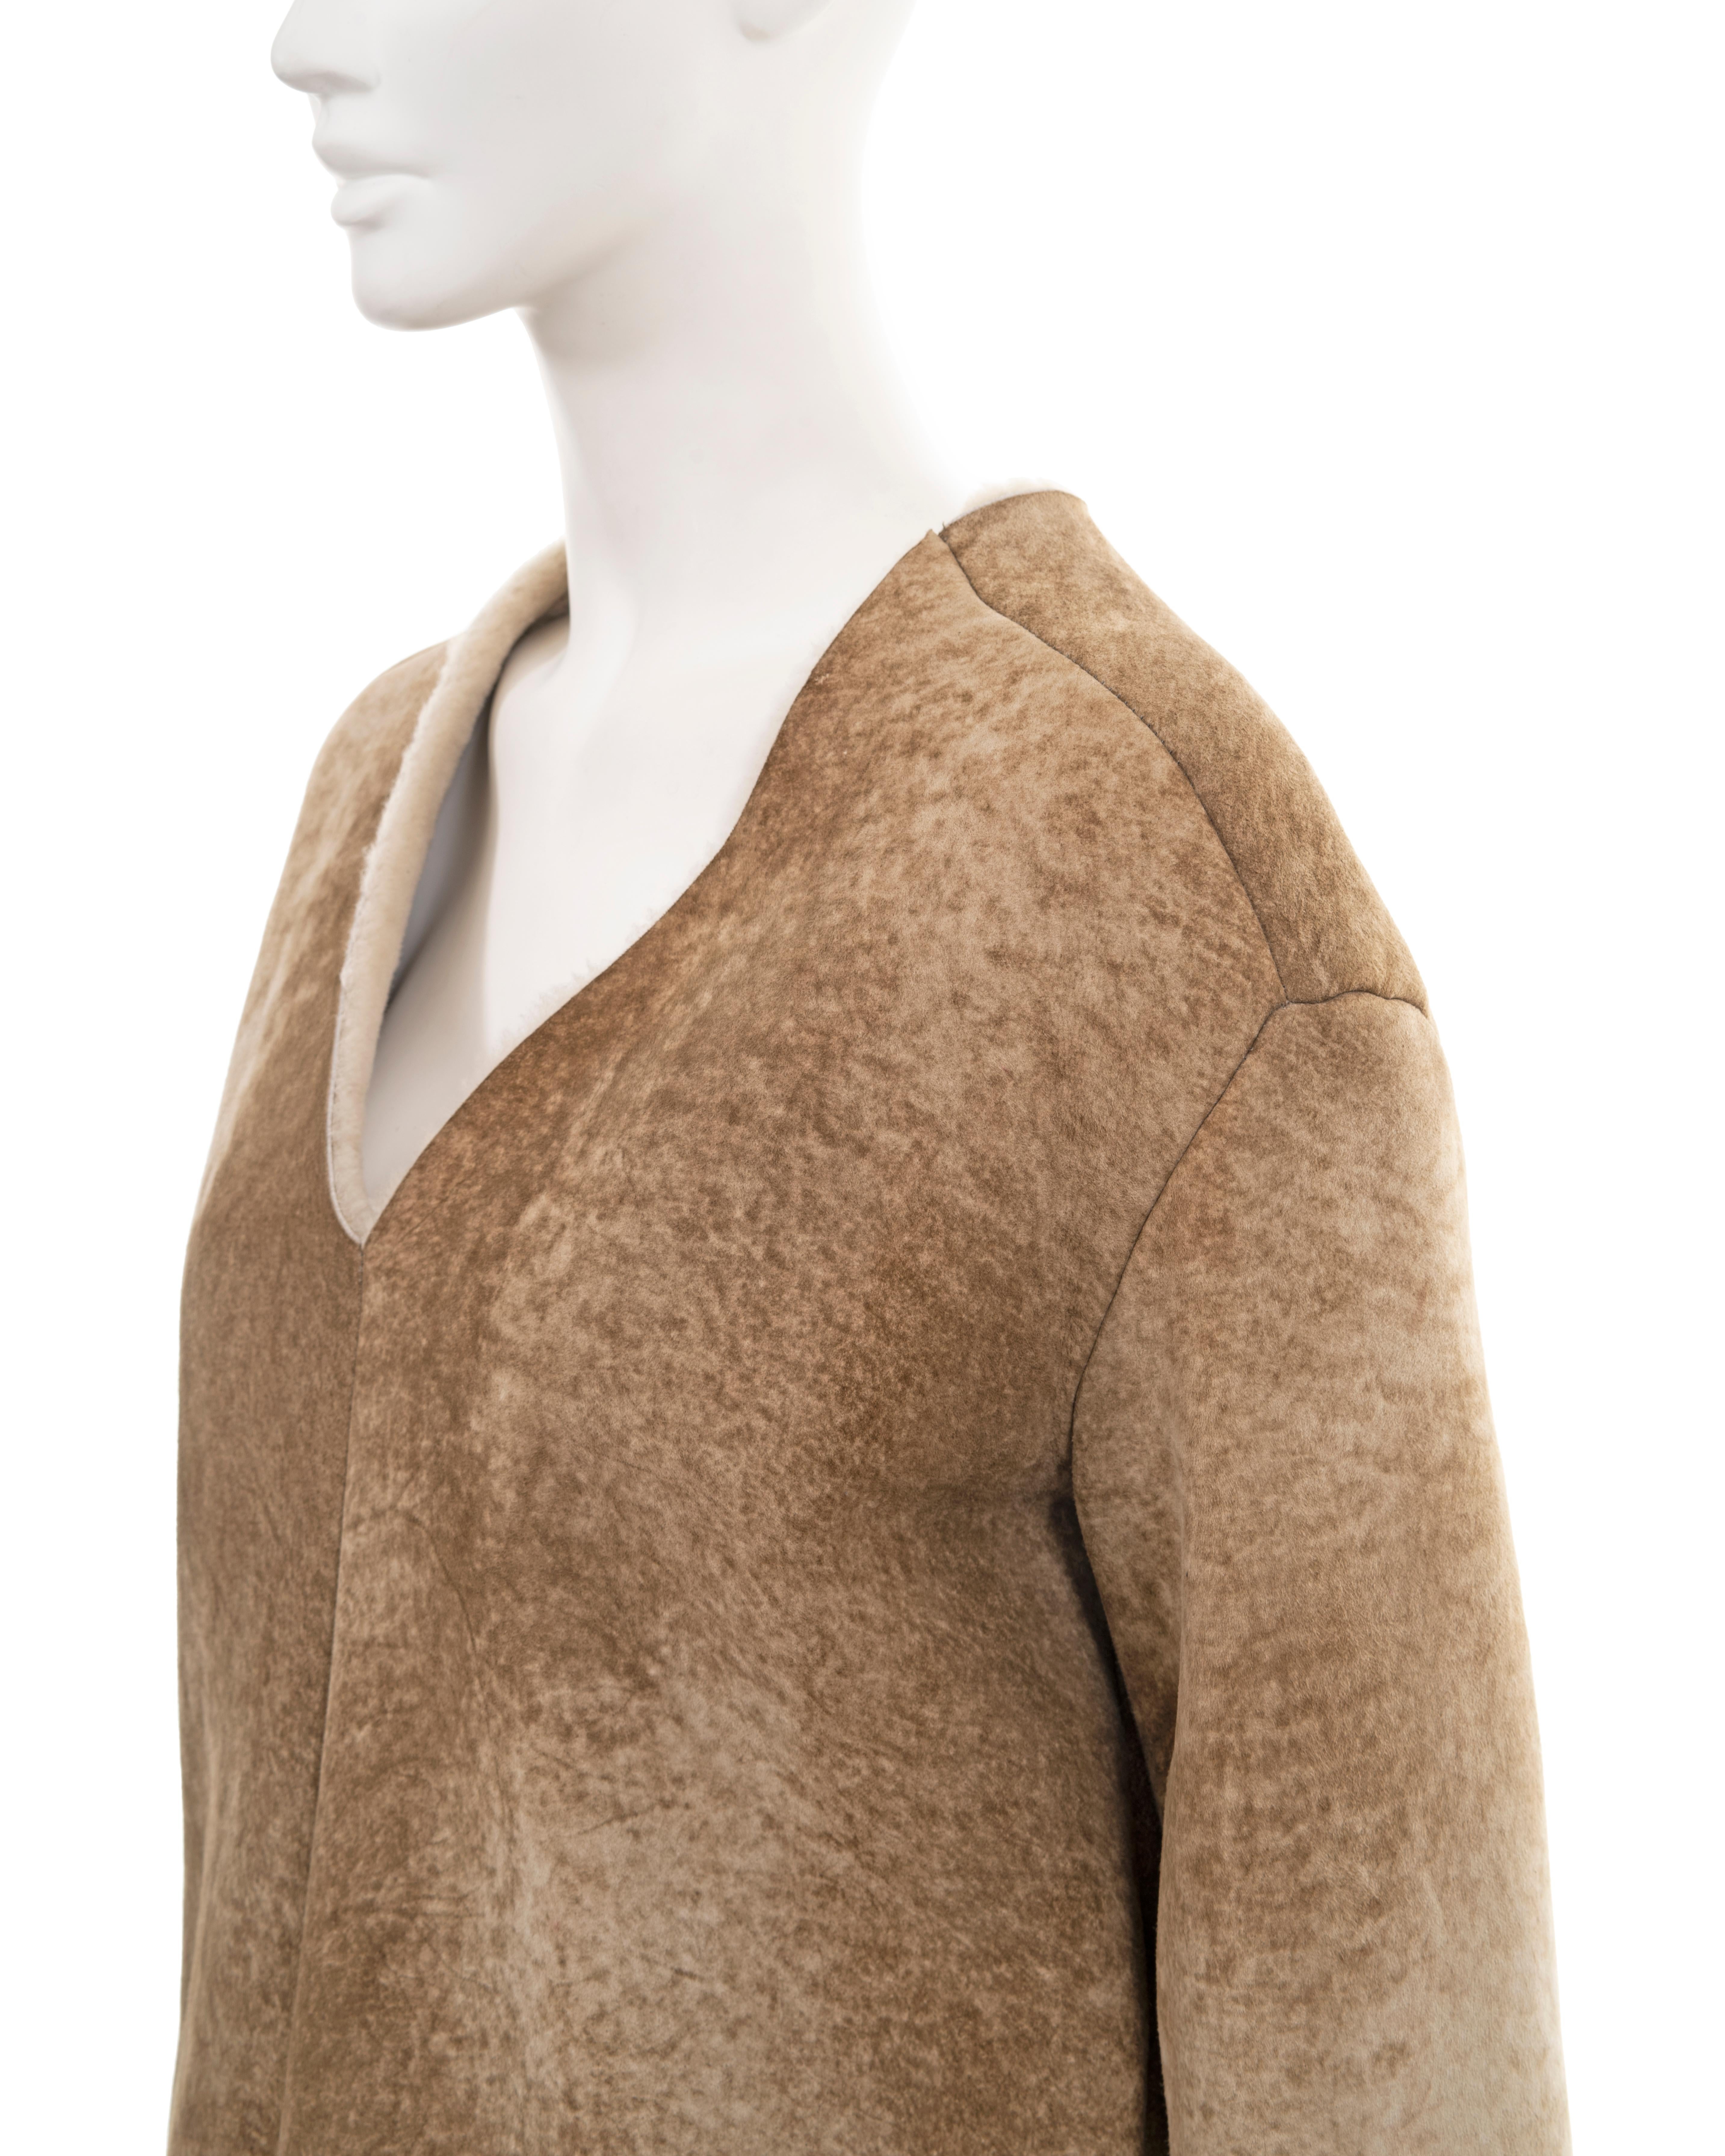 Ruffo Research by A.F. Vandevorst shearling pullover sweater, fw 2000 For Sale 2